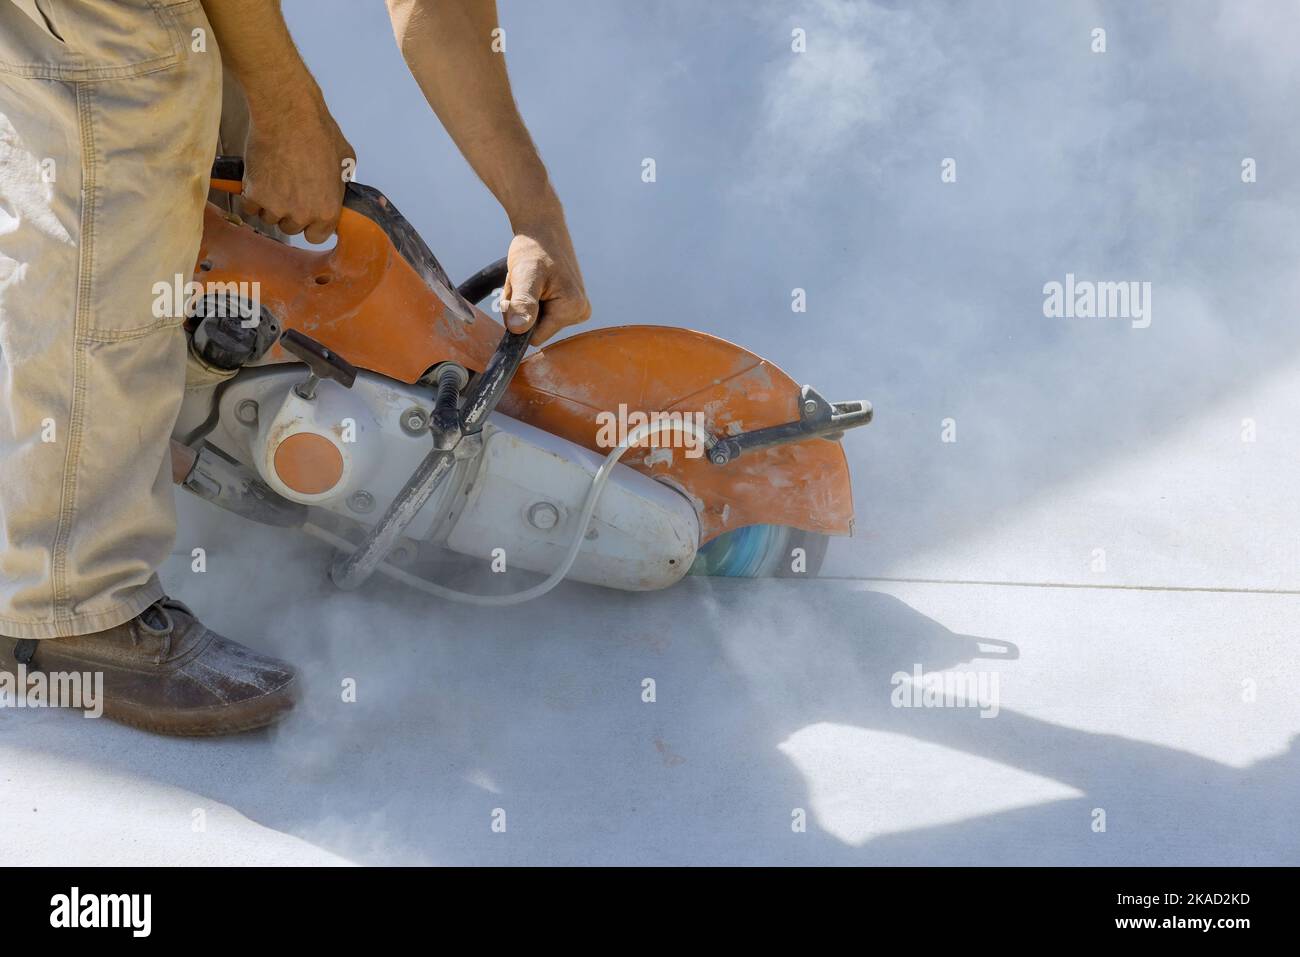 Diamond blade saw used by construction worker to cut concrete sidewalk in reconctruction works Stock Photo